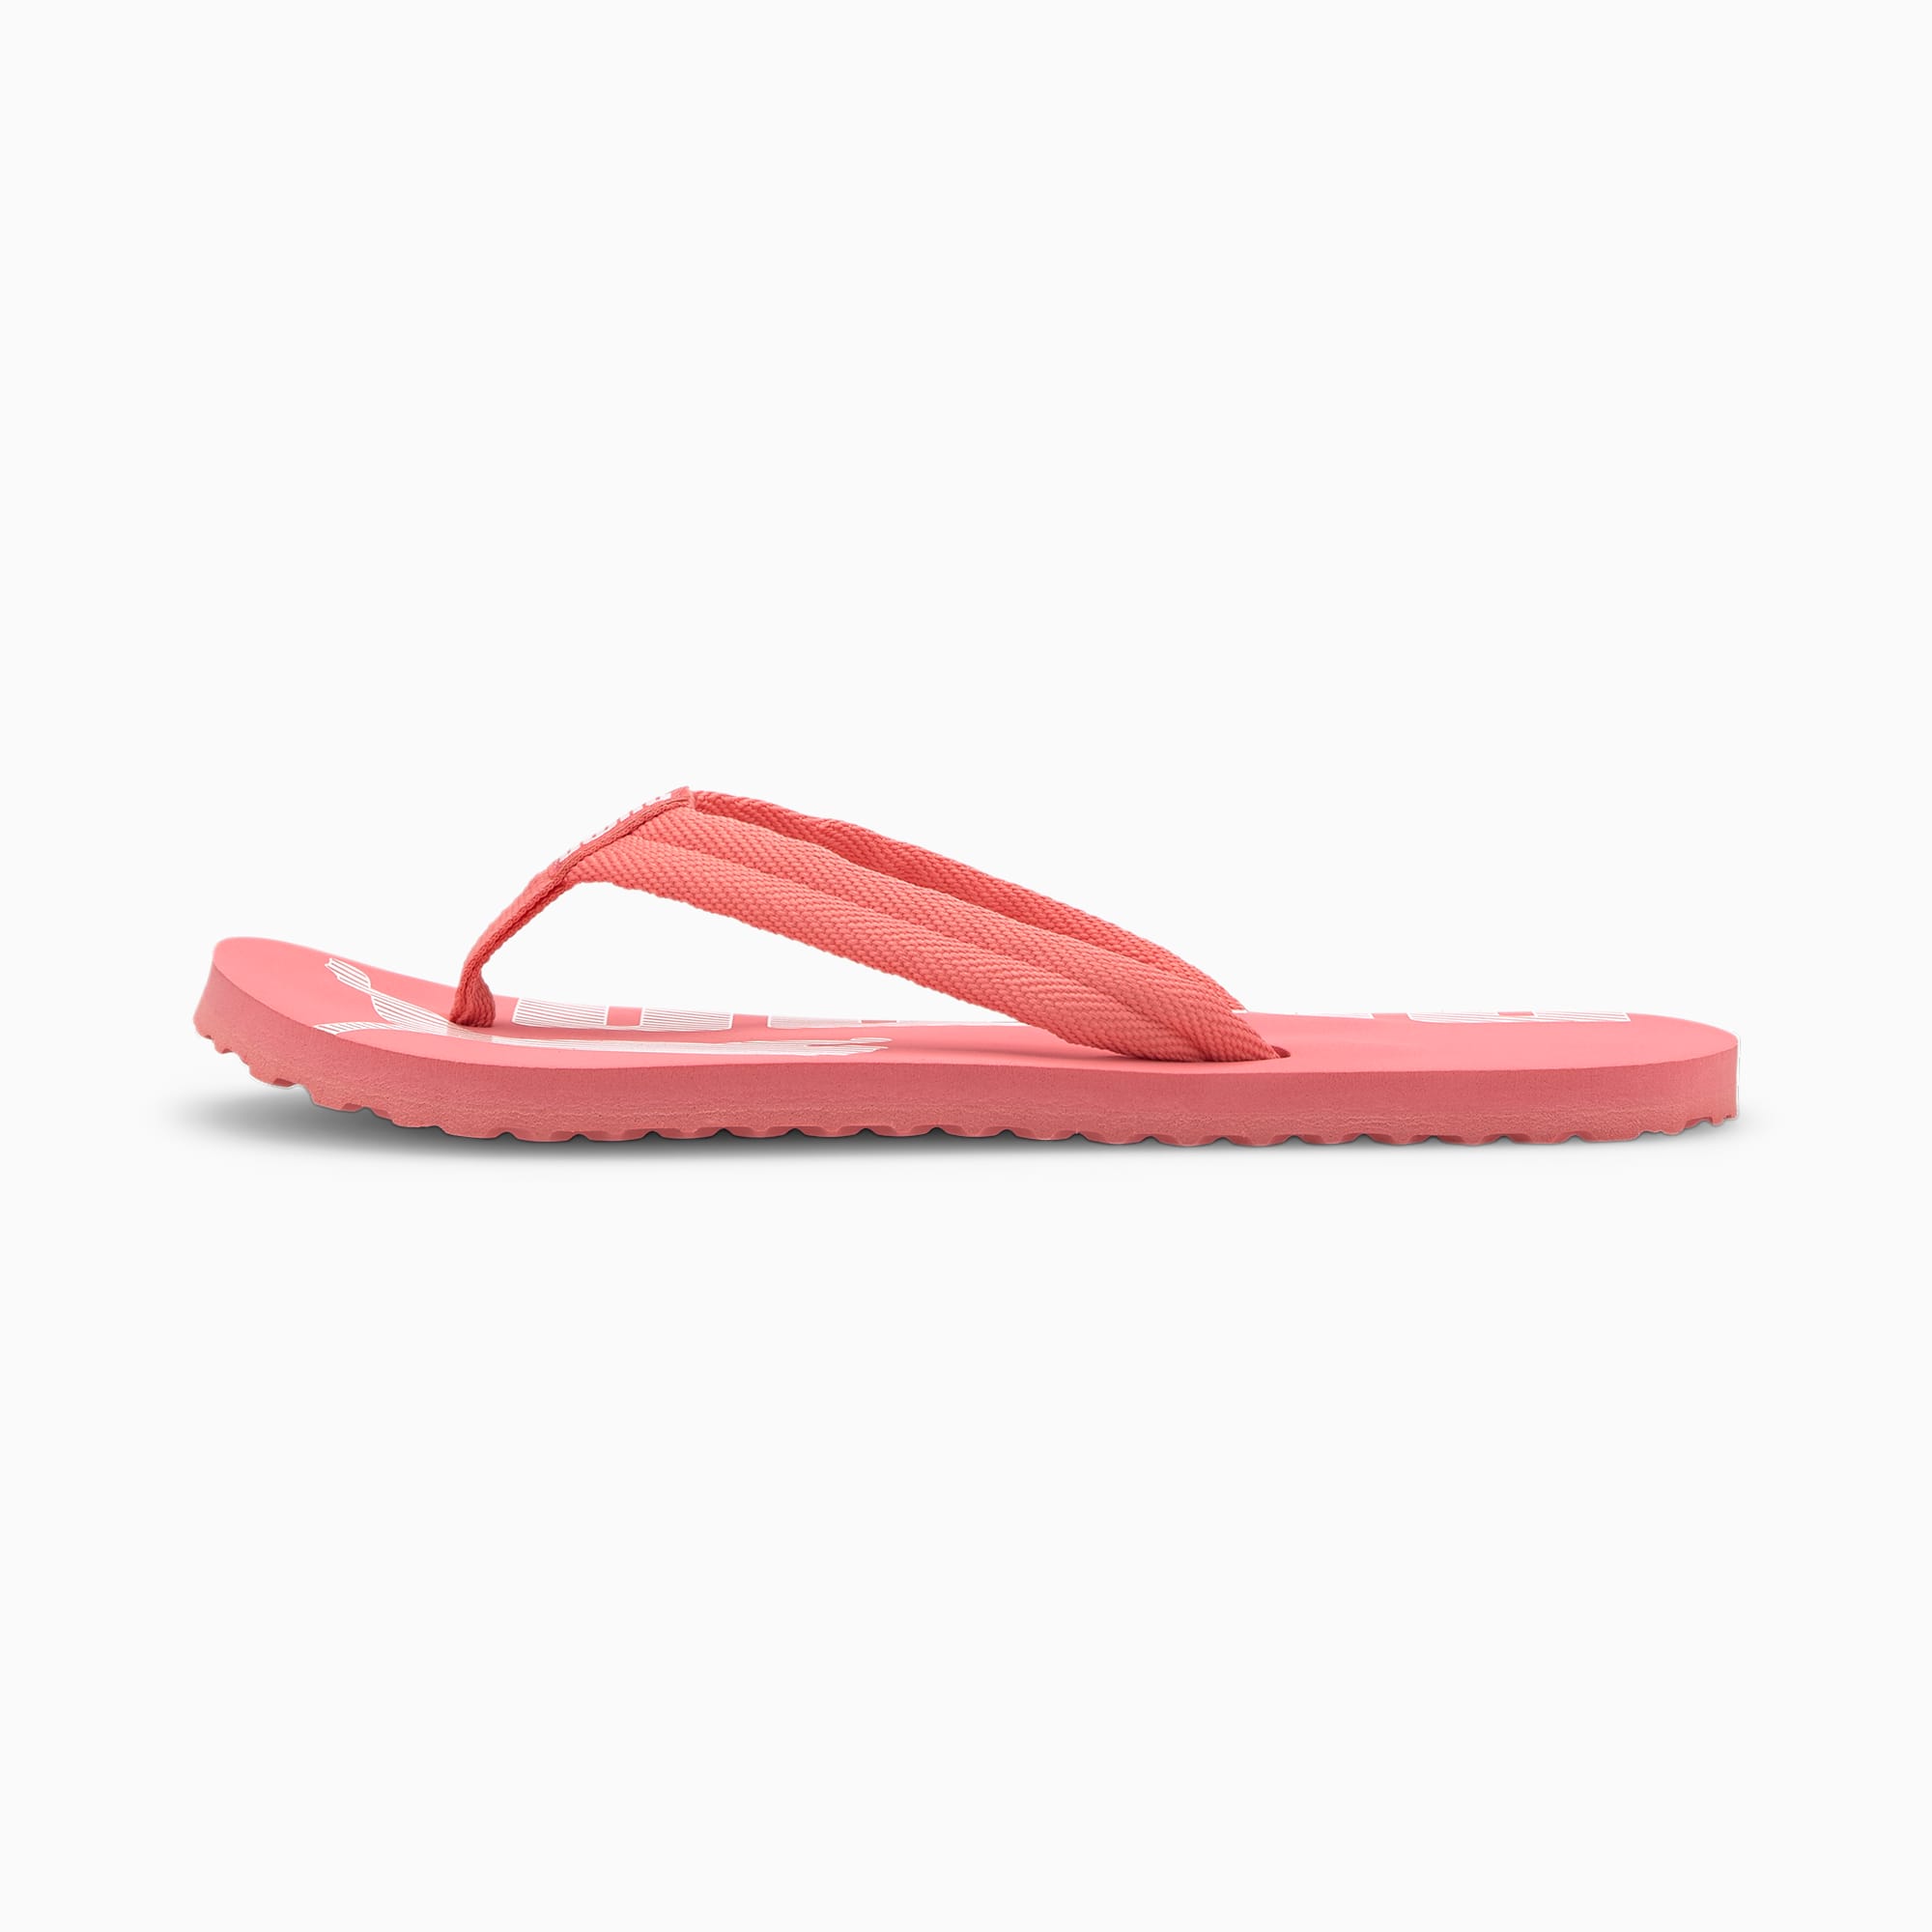 PUMA Tong Epic Flip v2, Rose, Taille 35.5, Chaussures